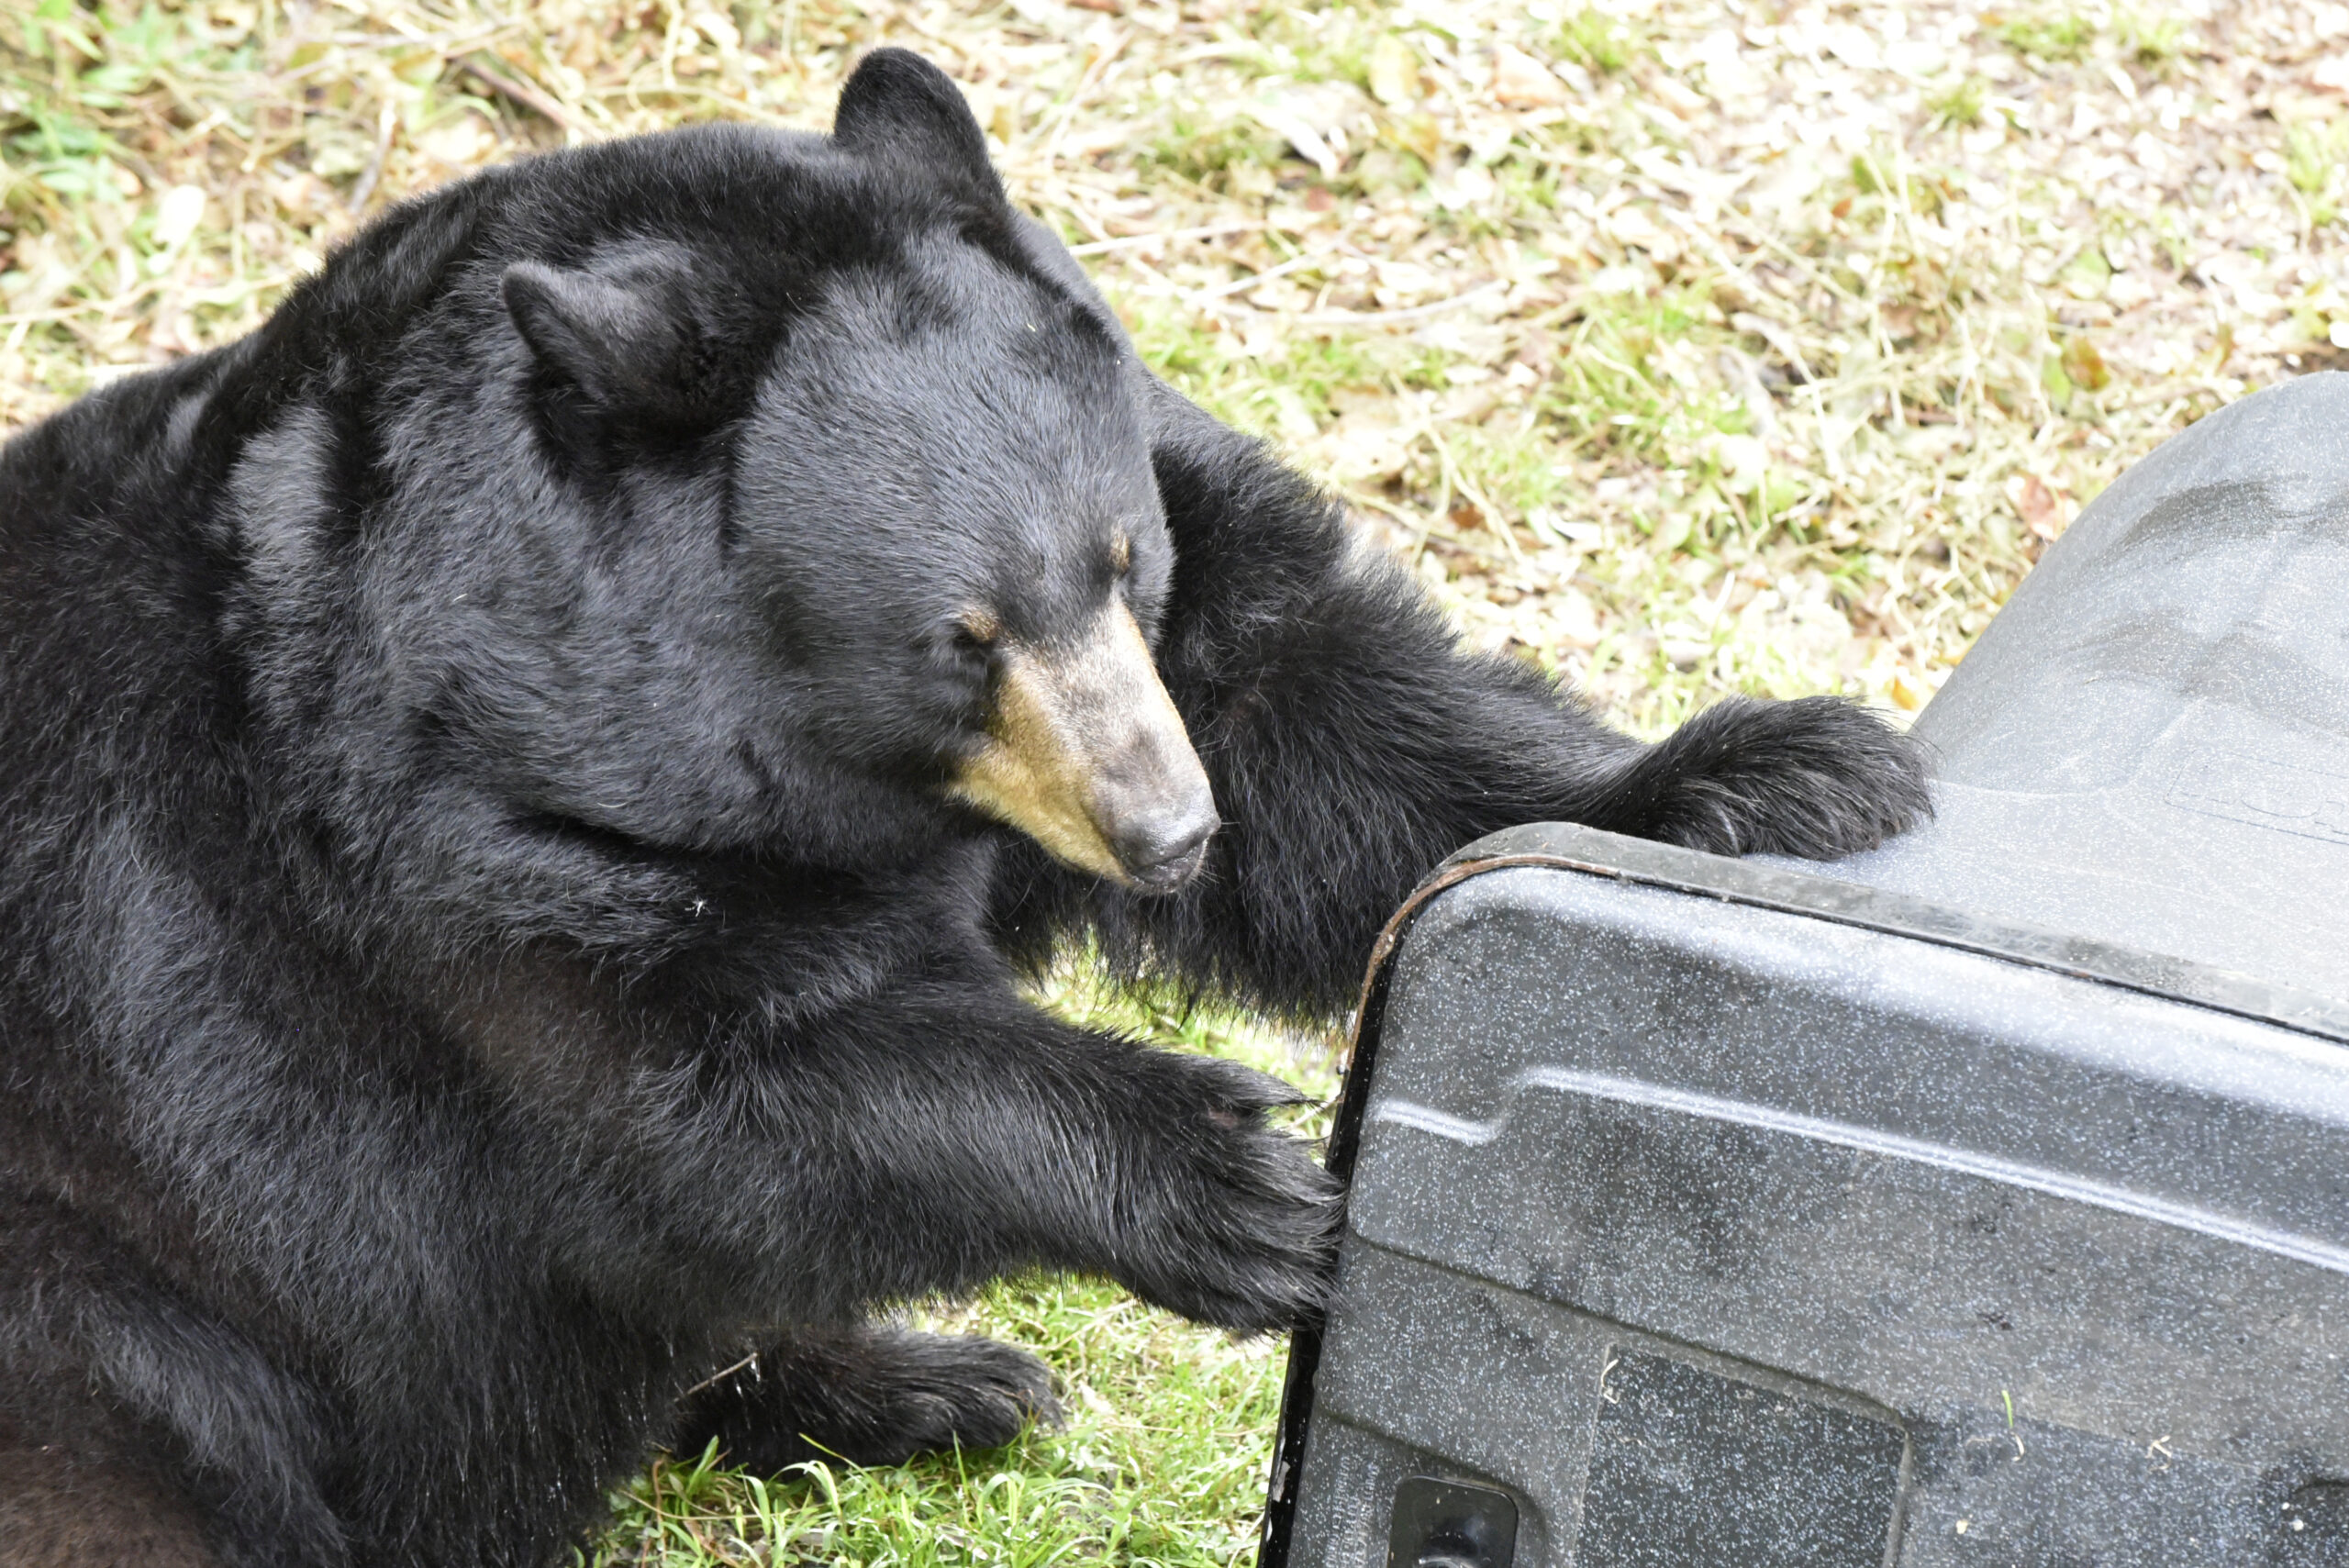 A black bear attempts to get into a trash can.